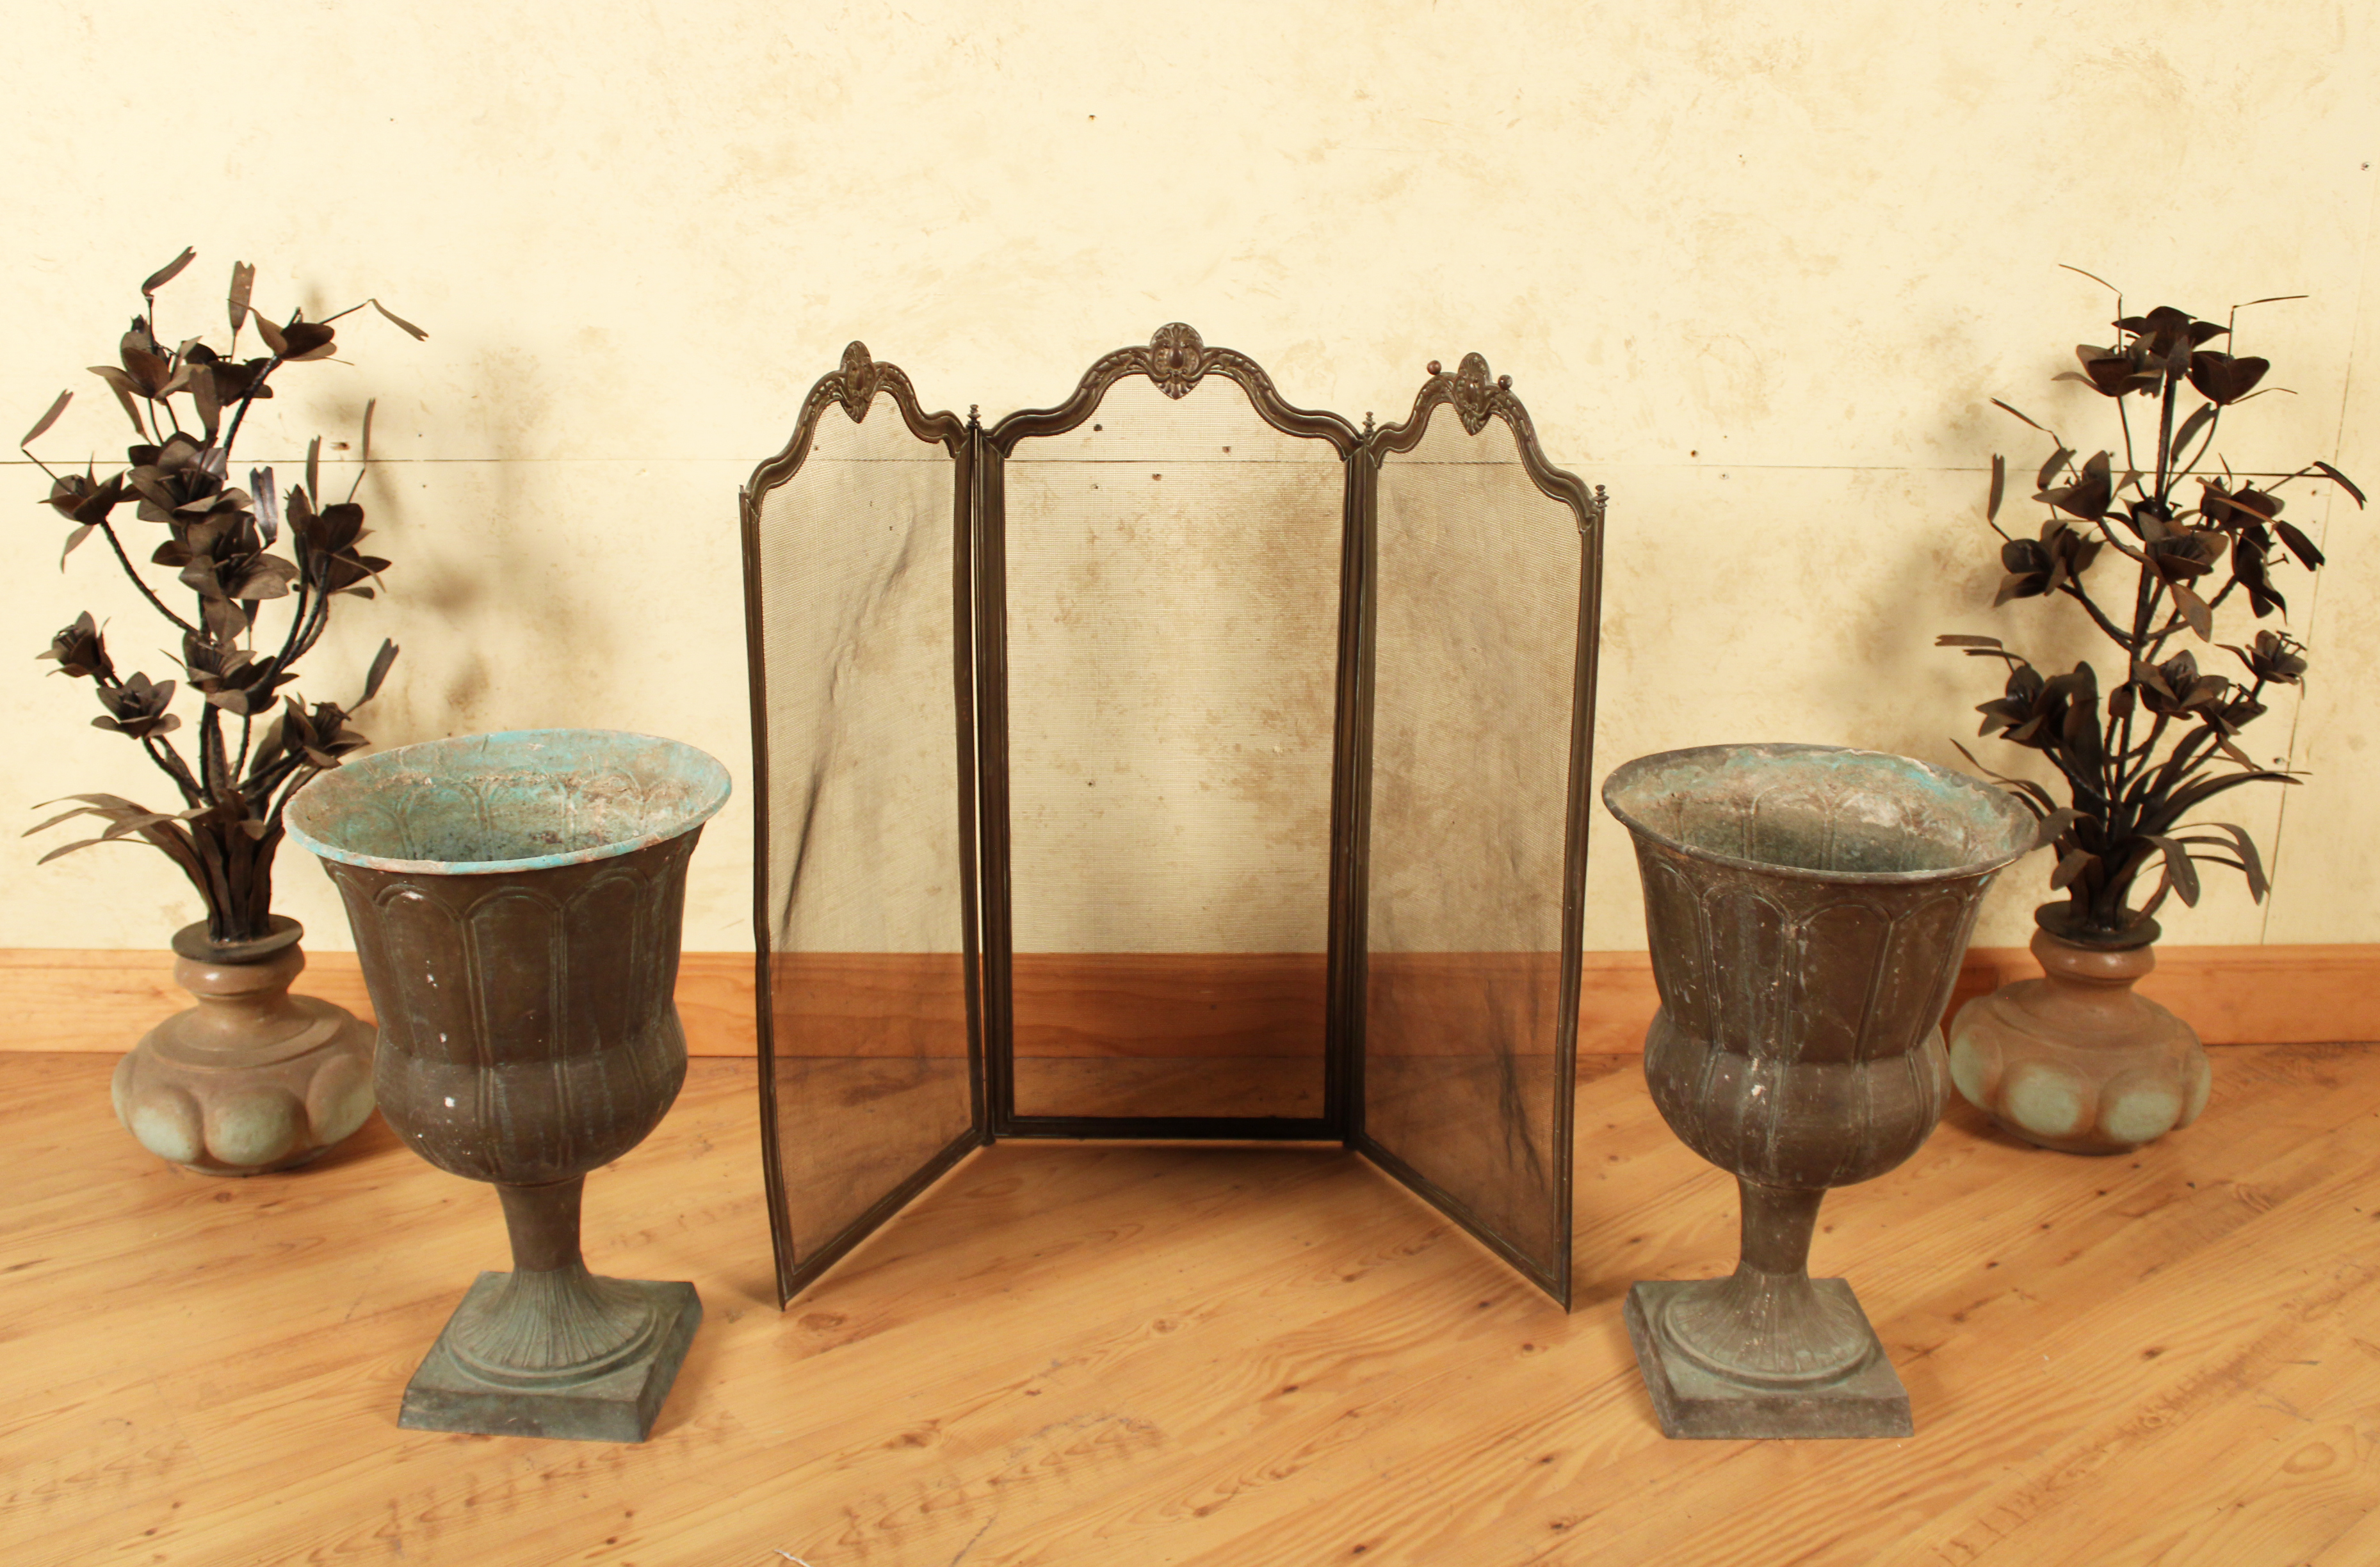 GROUP OF FIVE DECORATIVE ITEMS